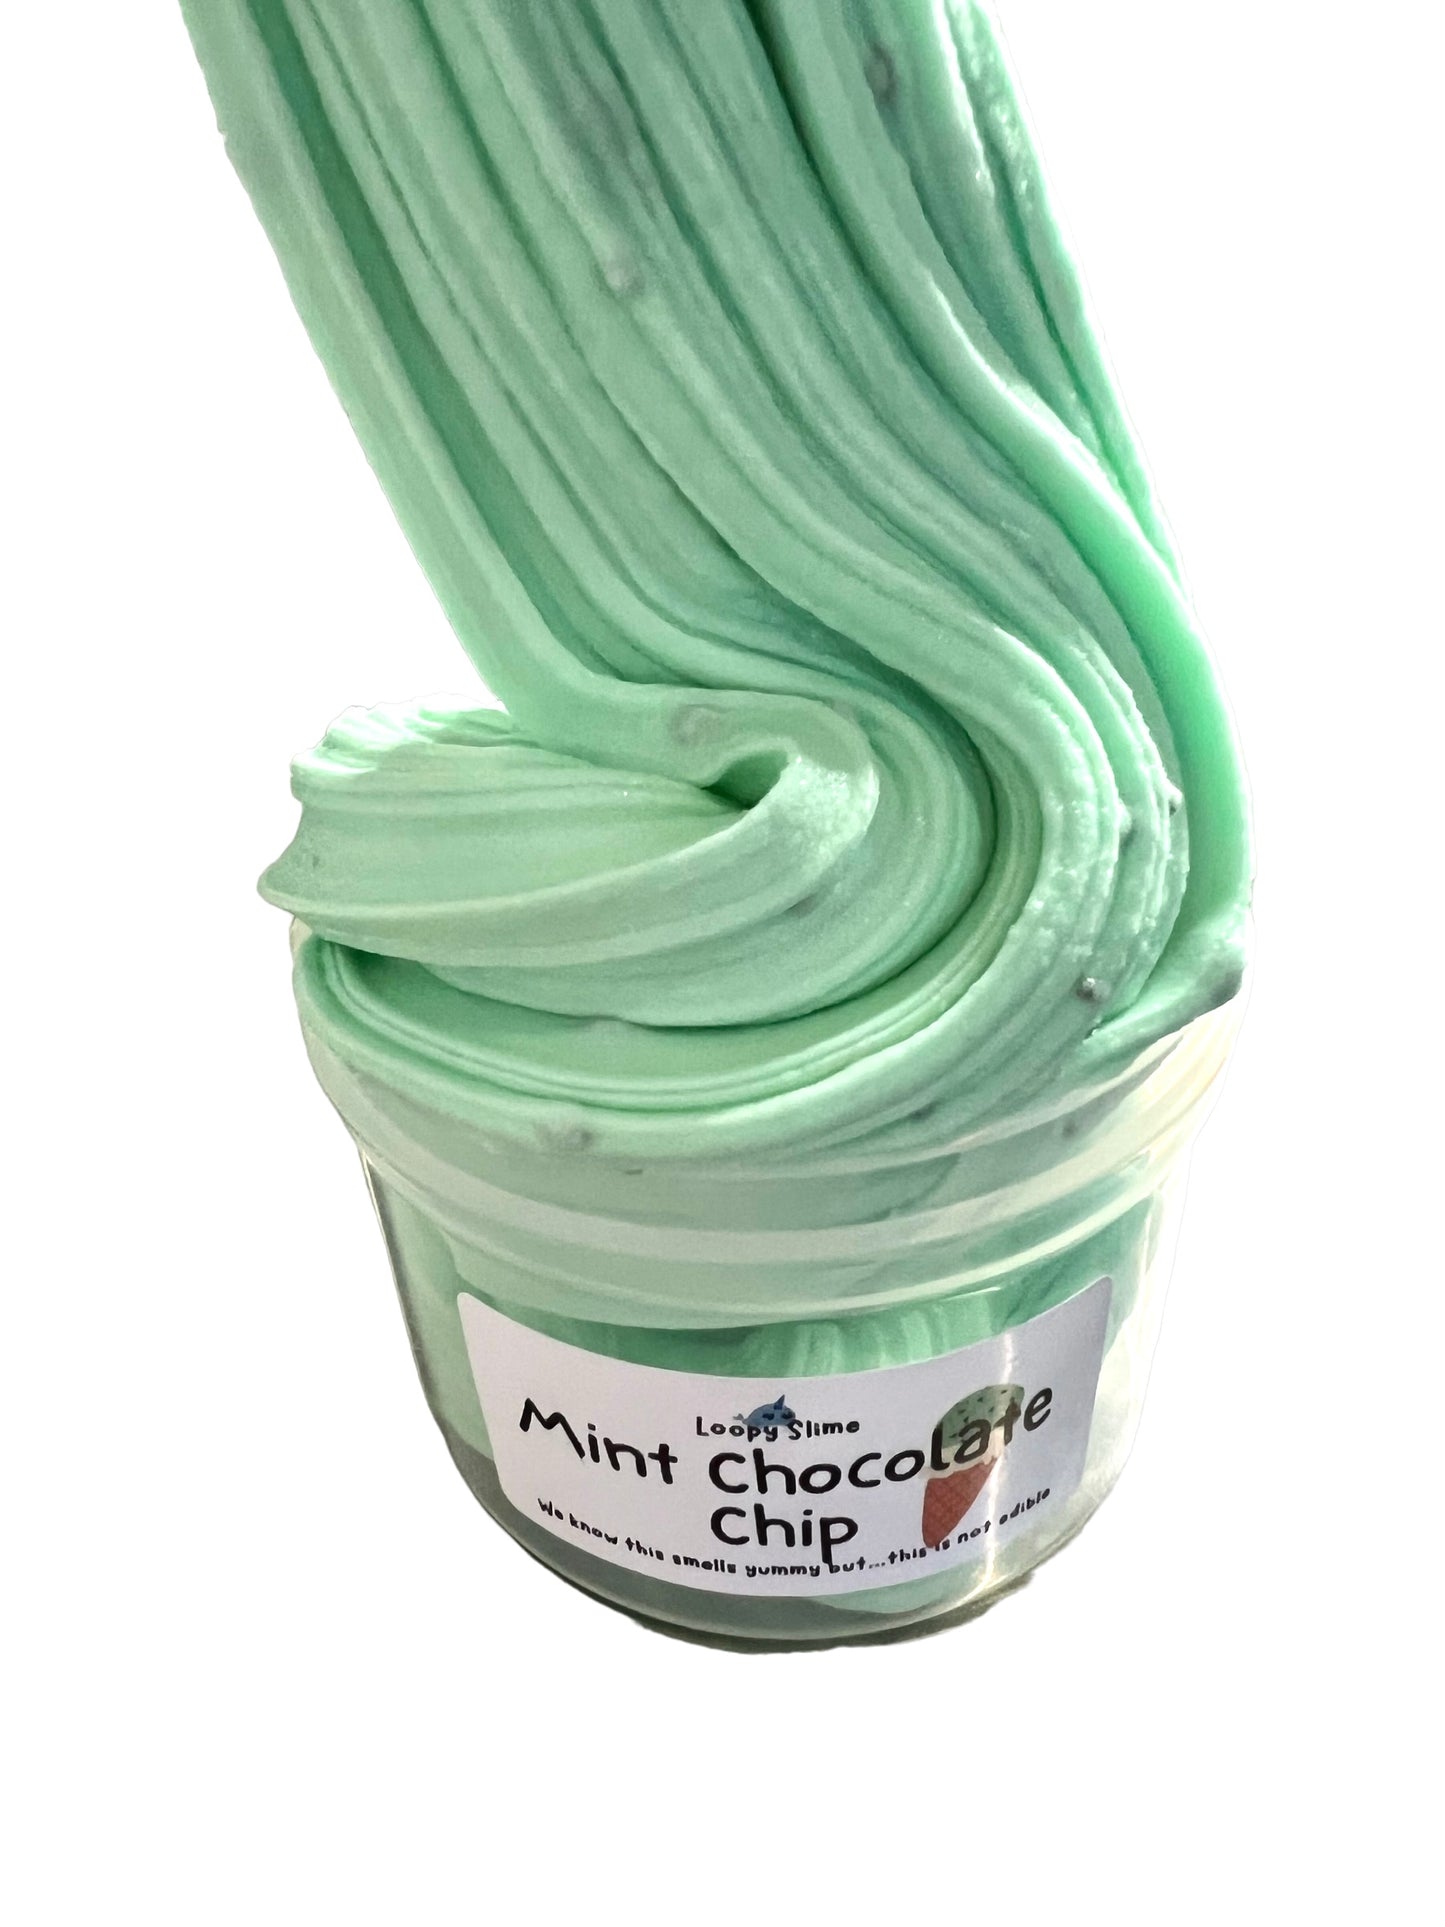 Mint chocolate chip slime